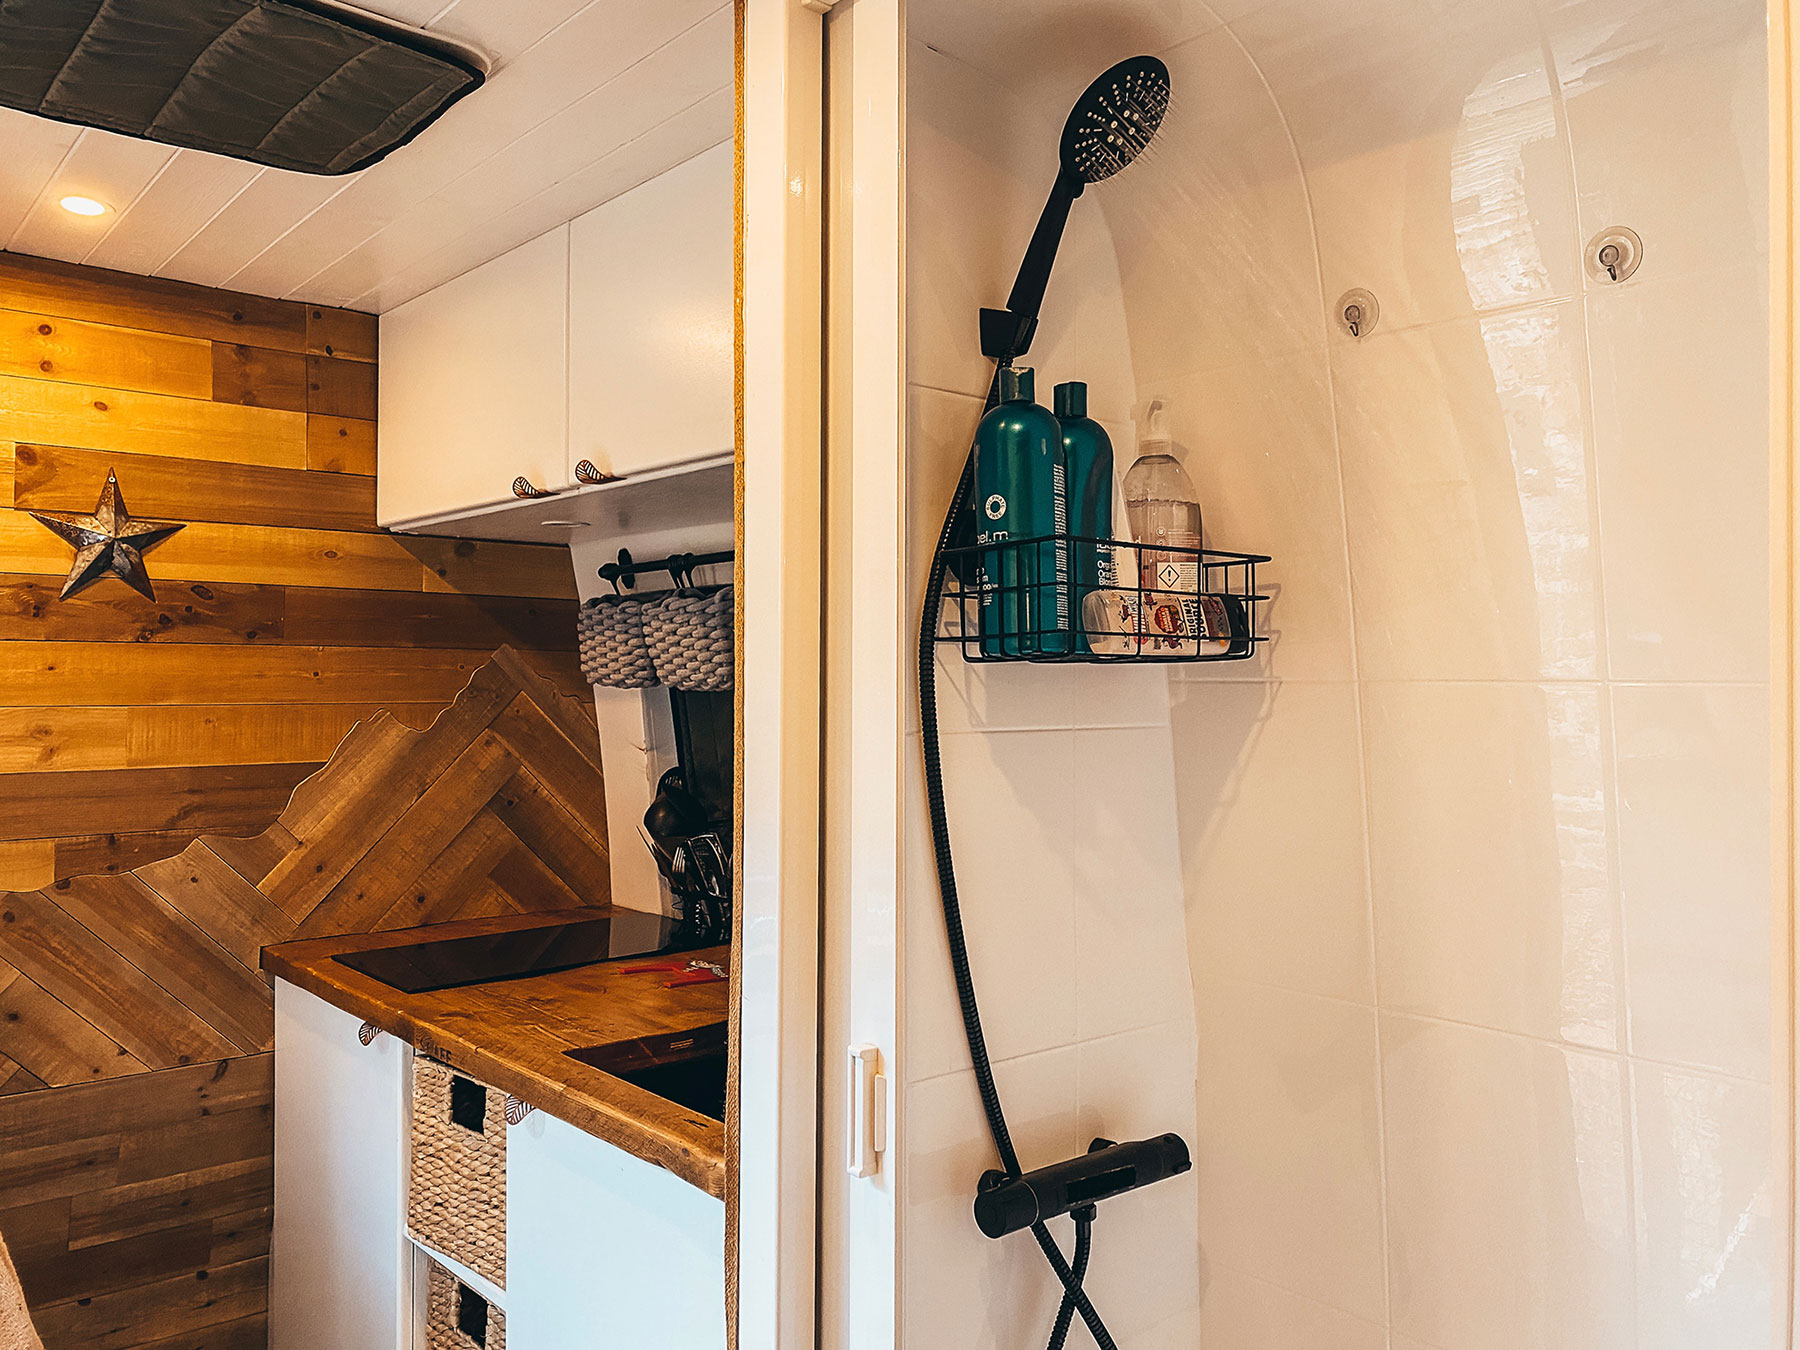 Shower and kitchen in our campervan with hot water to our kitchen tap and shower